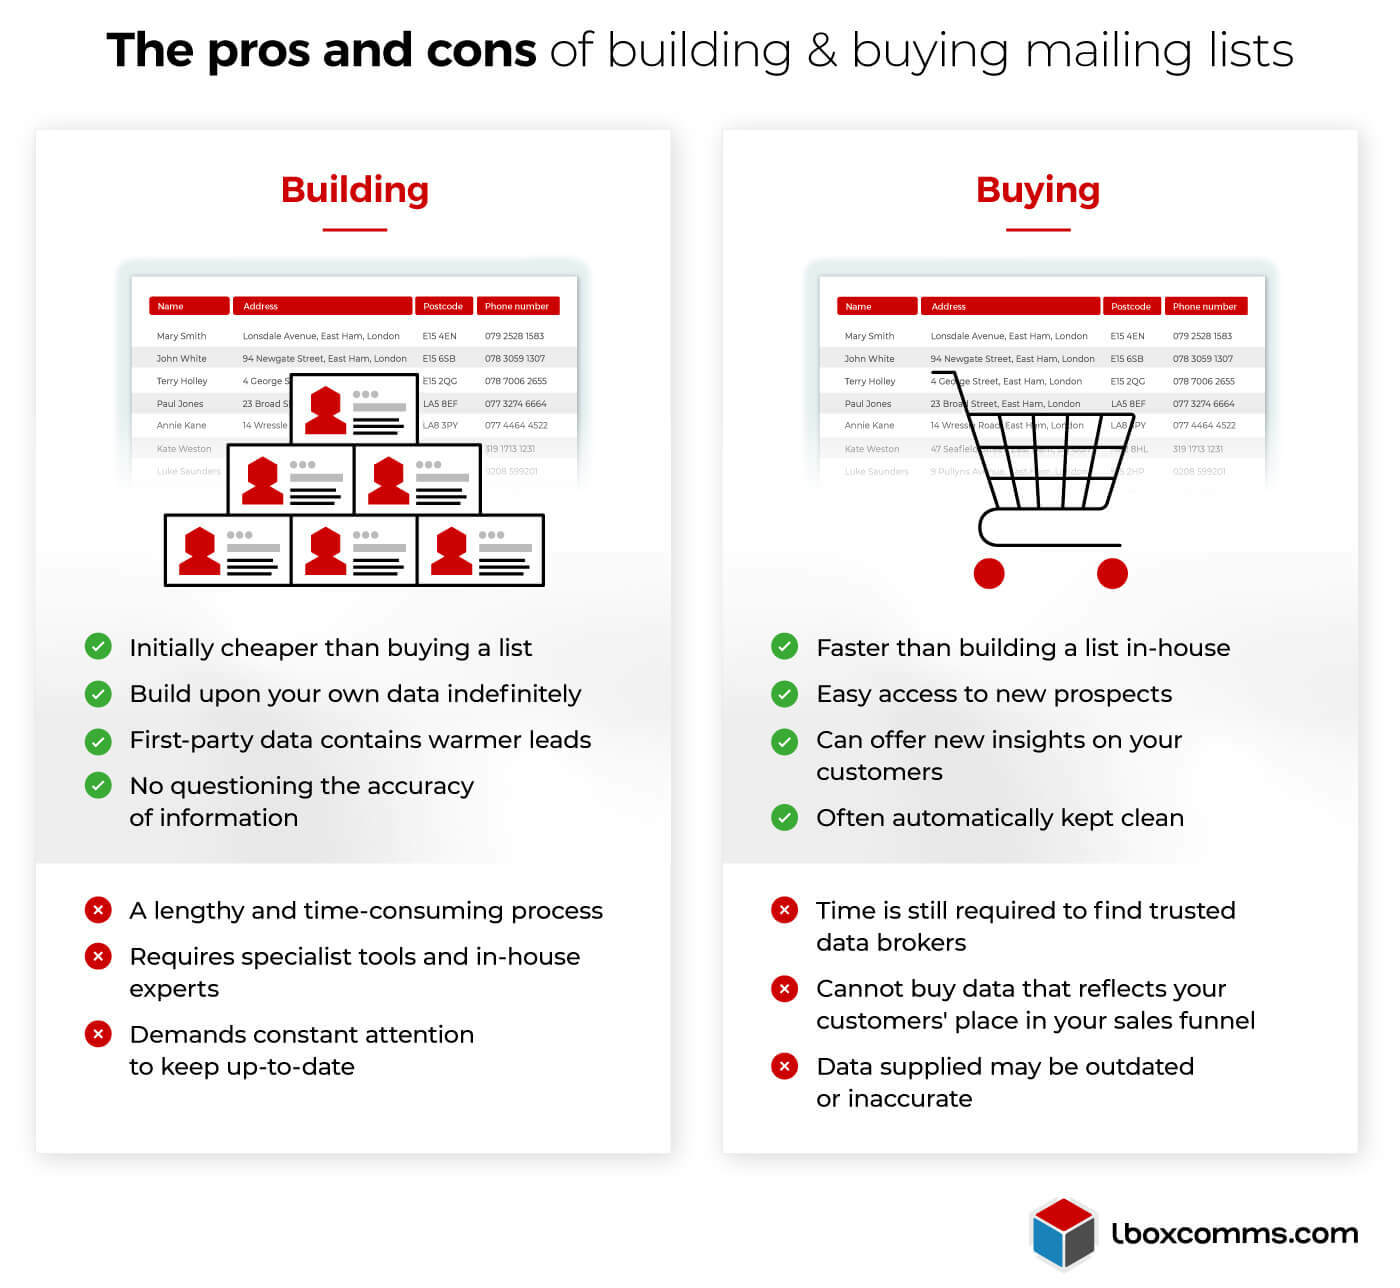 Pros and cons of building and buying mailing lists for direct mail campaigns